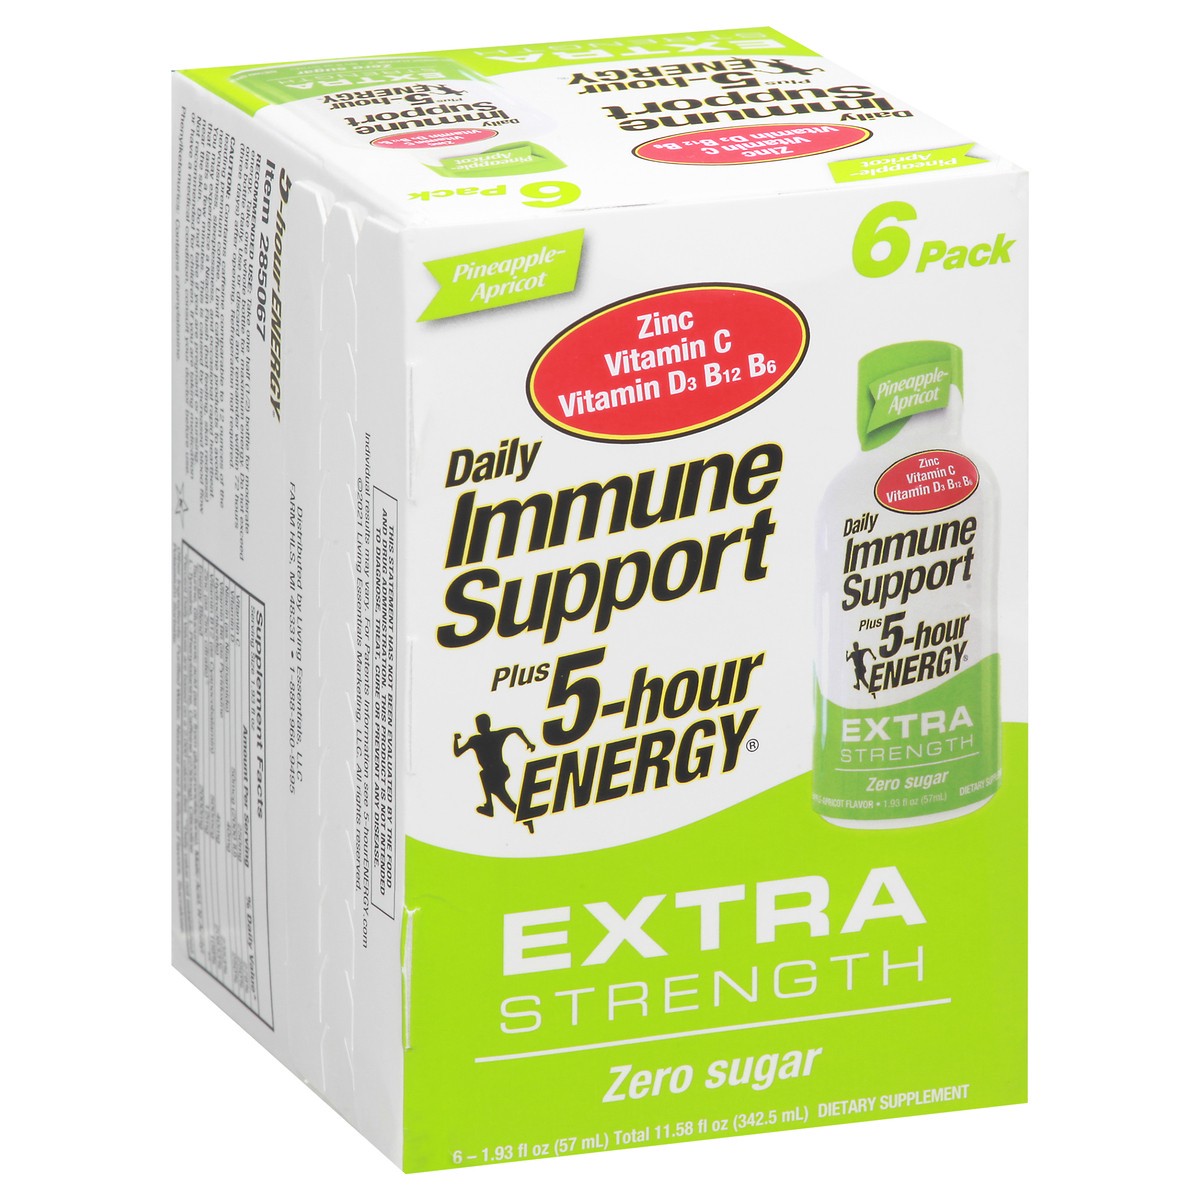 slide 2 of 9, 5-hour ENERGY Daily Immune Support Extra Strength Pineapple Apricot 6 pack, 1.93 oz